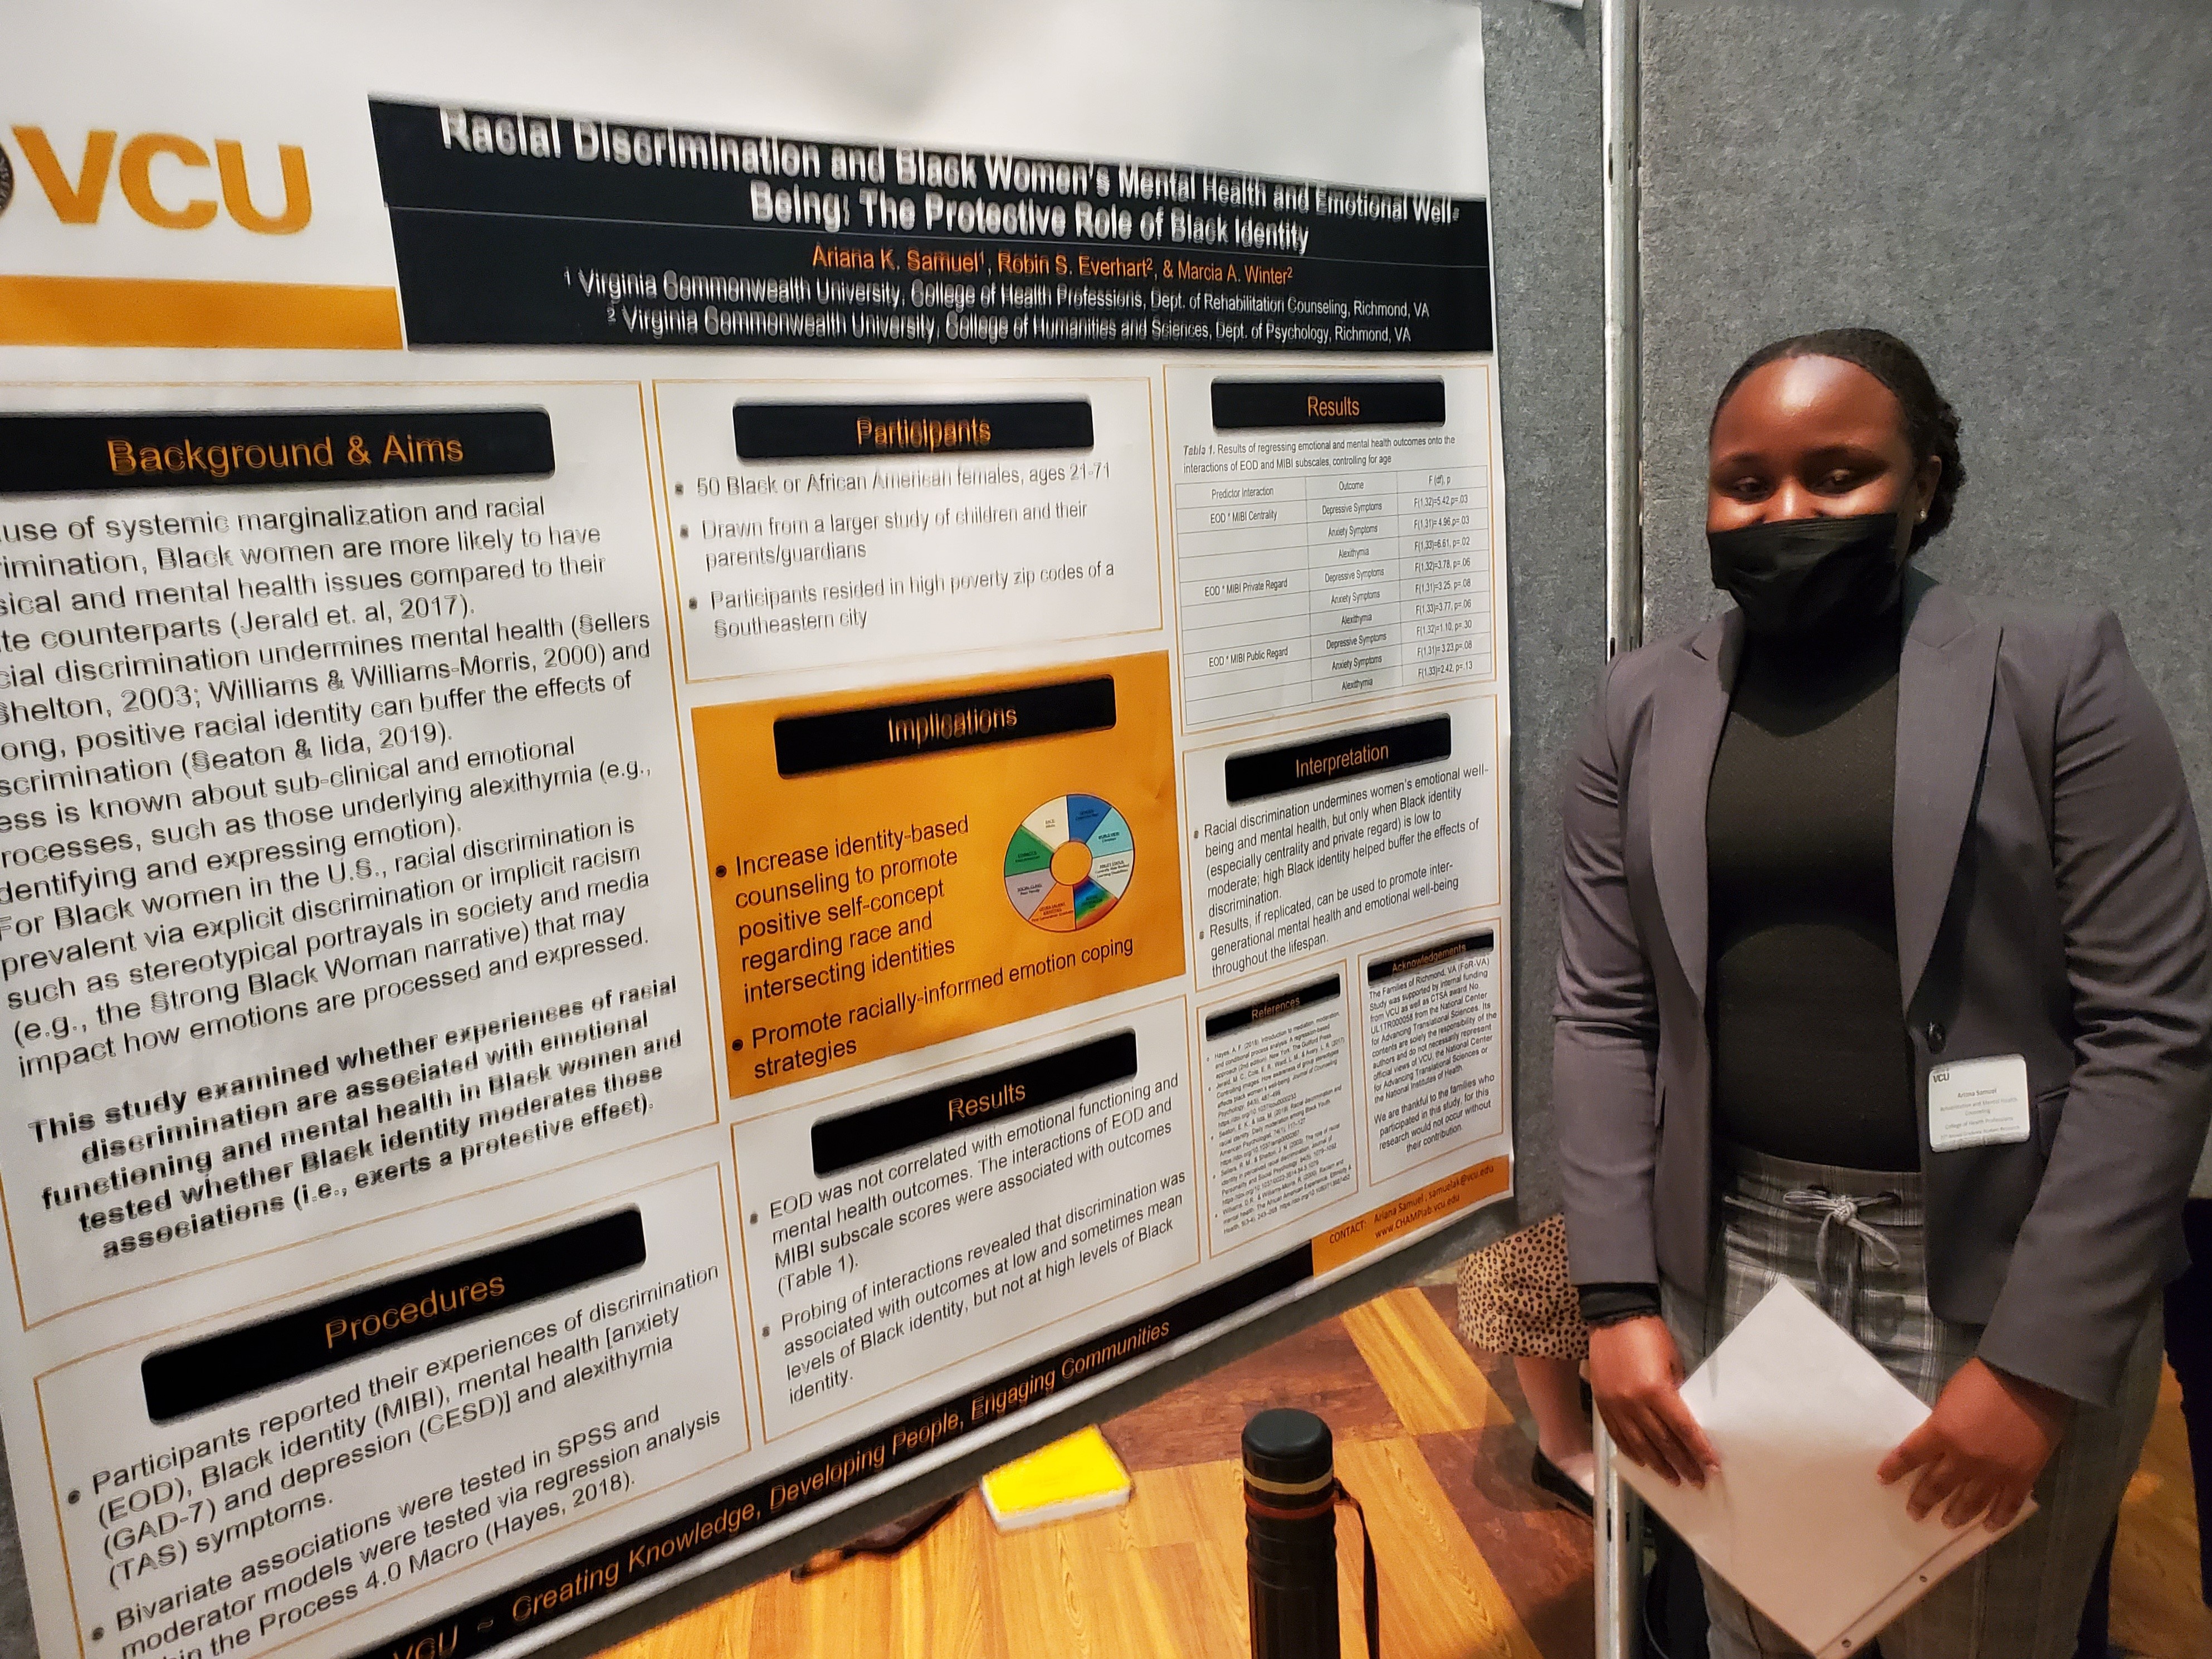 Ariana Samuel presents Racial Discrimination and Black Women’s Mental Health and Emotional Well-being: The Protective Role of Black Identity